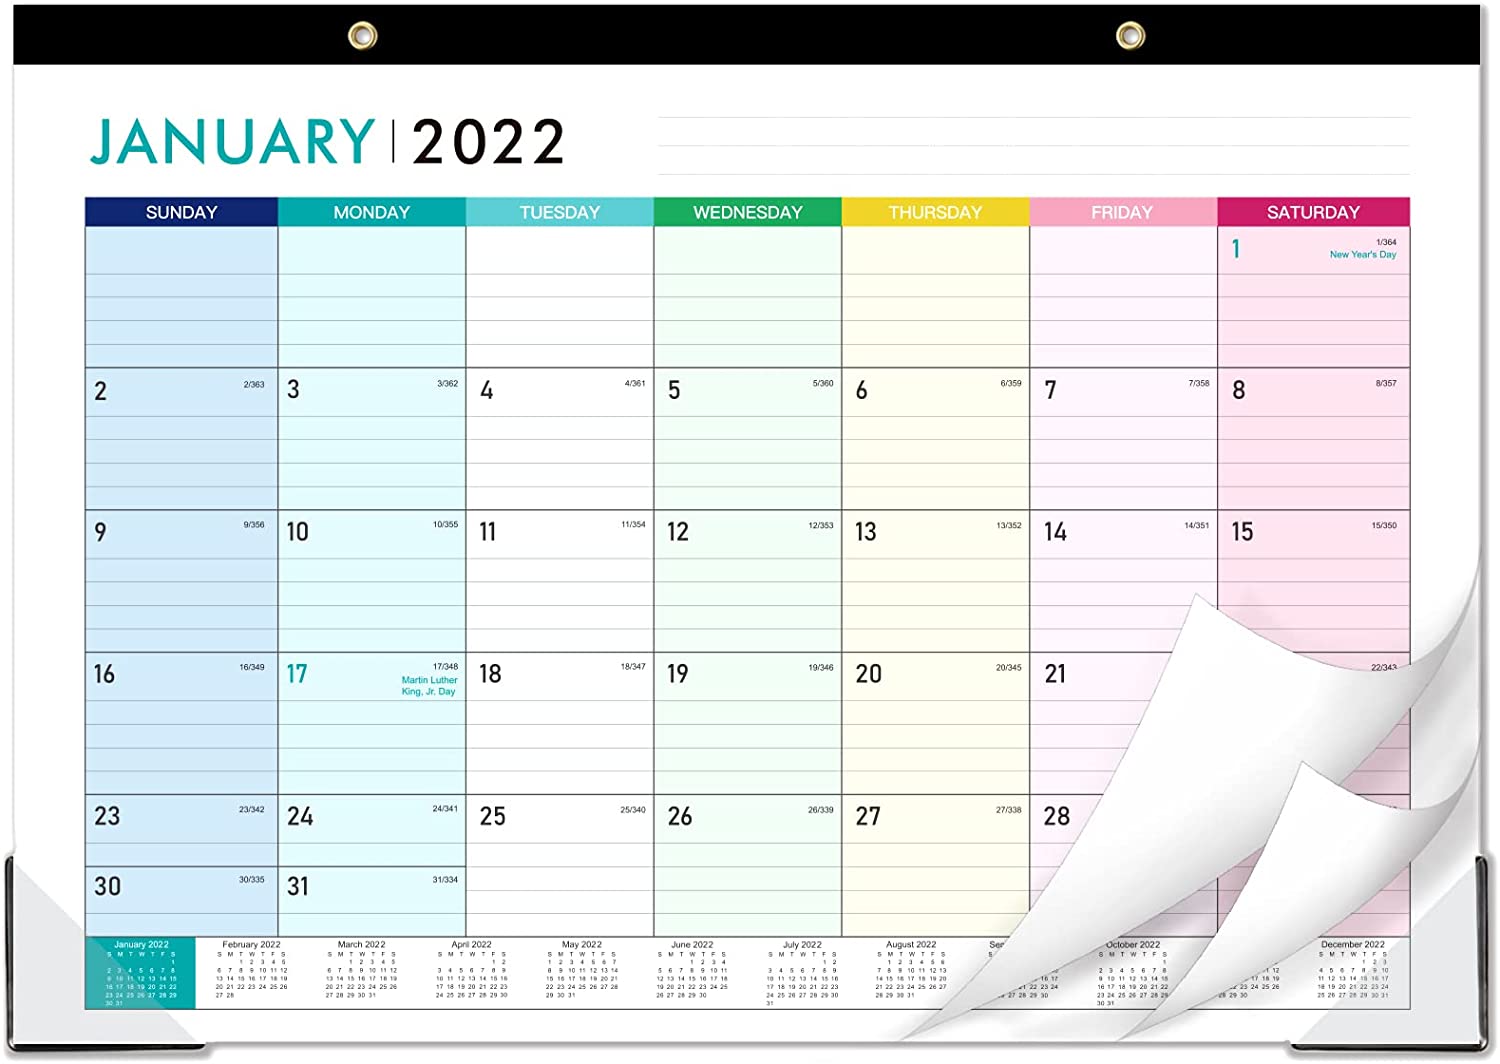 Desk Calendar 2022 – 18 Monthly Desk/Wall Calendar 2-in-1,16.8″ x 12″, January 2022 – June 2023, Thick Paper with Corner Protectors, Large Ruled Blocks – Colorful Lump